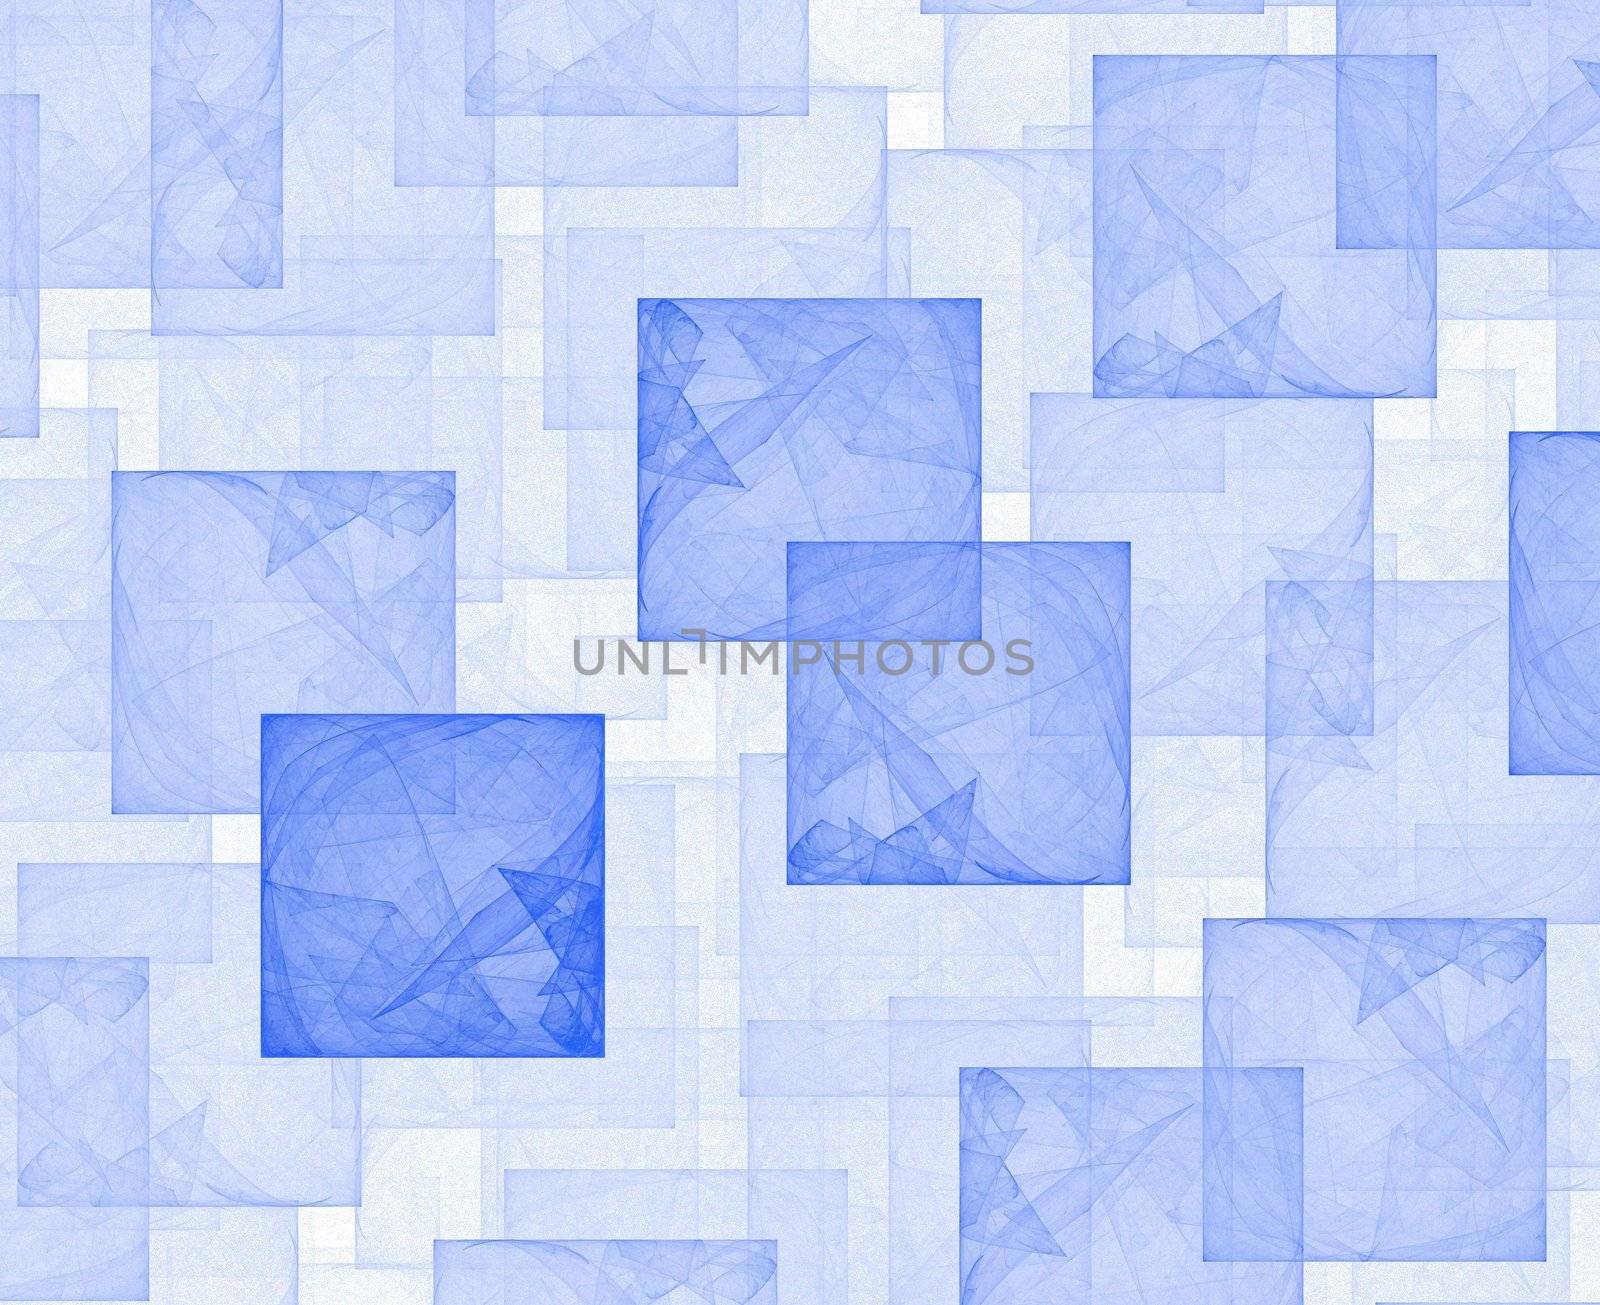 high res flame fractal in blue color, filling the frame with multiple cubes